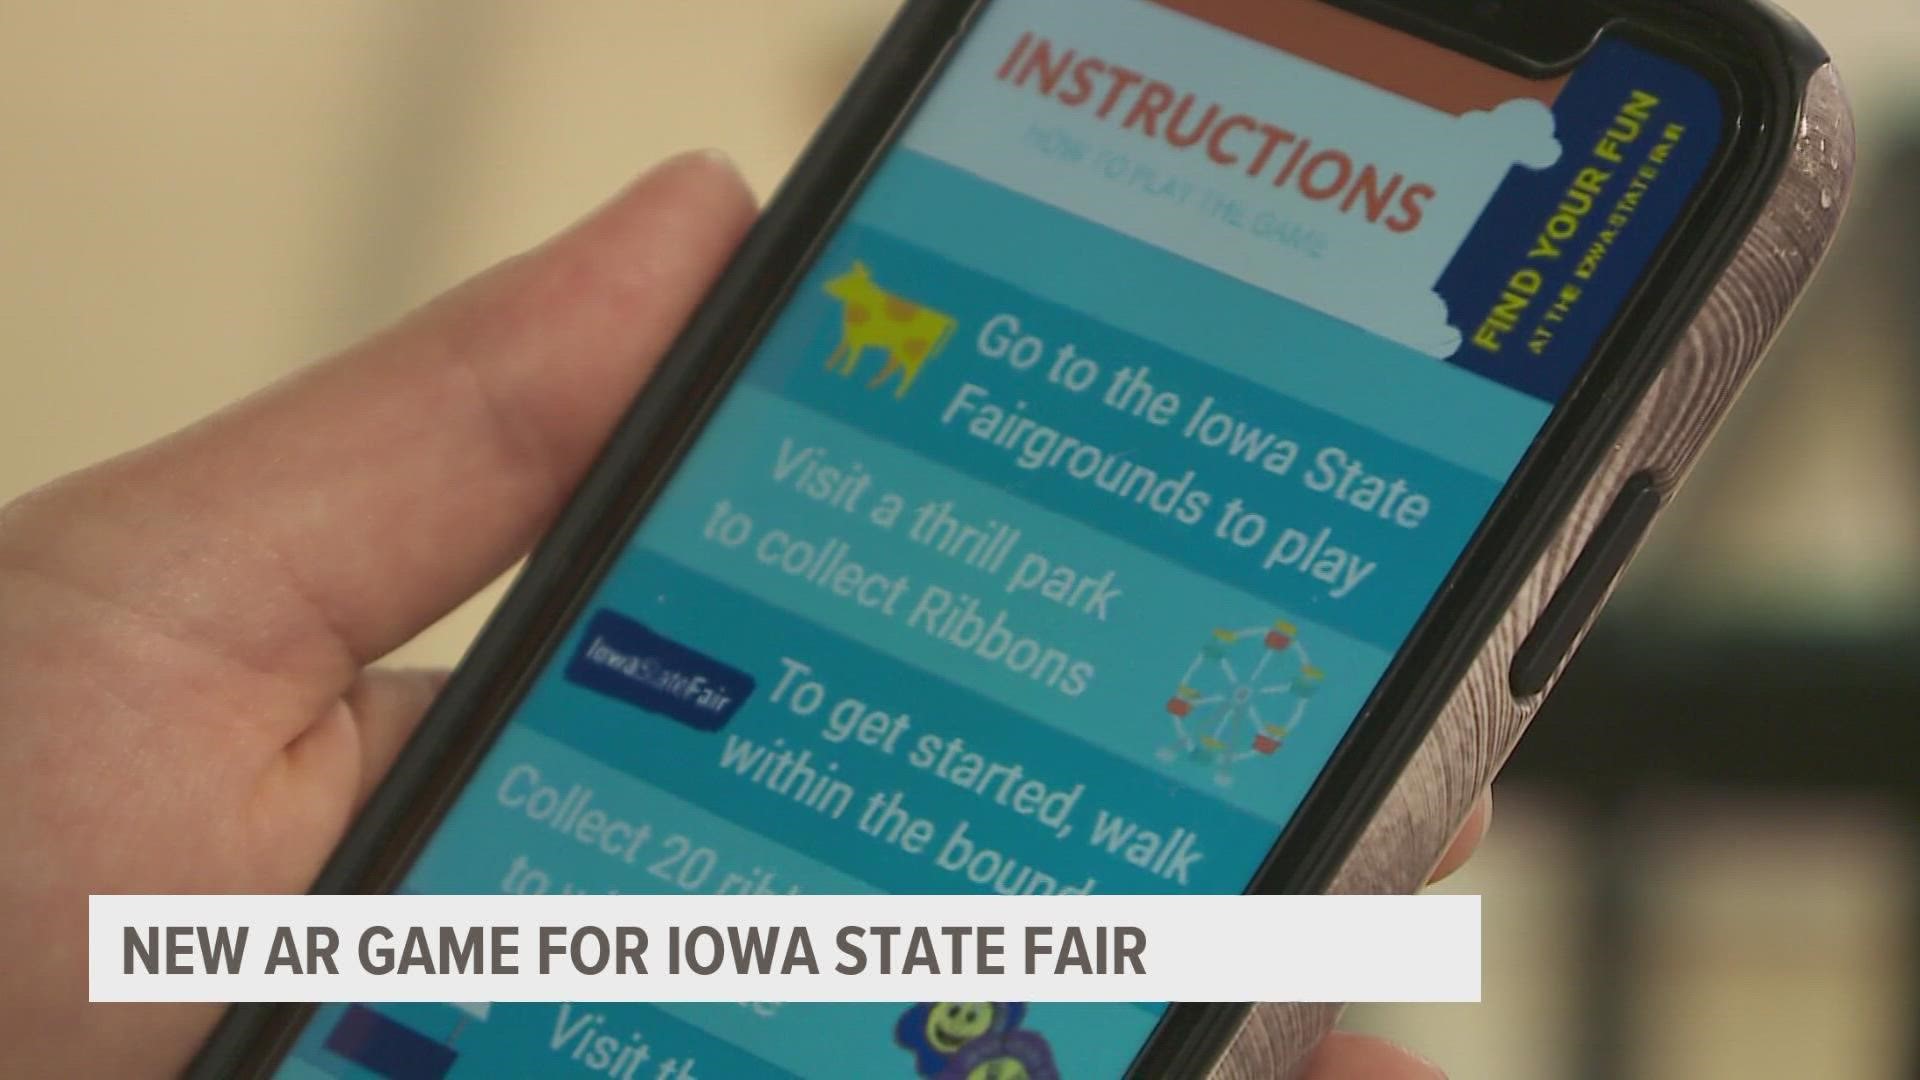 The state fair will be offering an augmented reality game through the new app, called blue ribbon rescue. It's very similar to the 2016 game Pokemon GO.